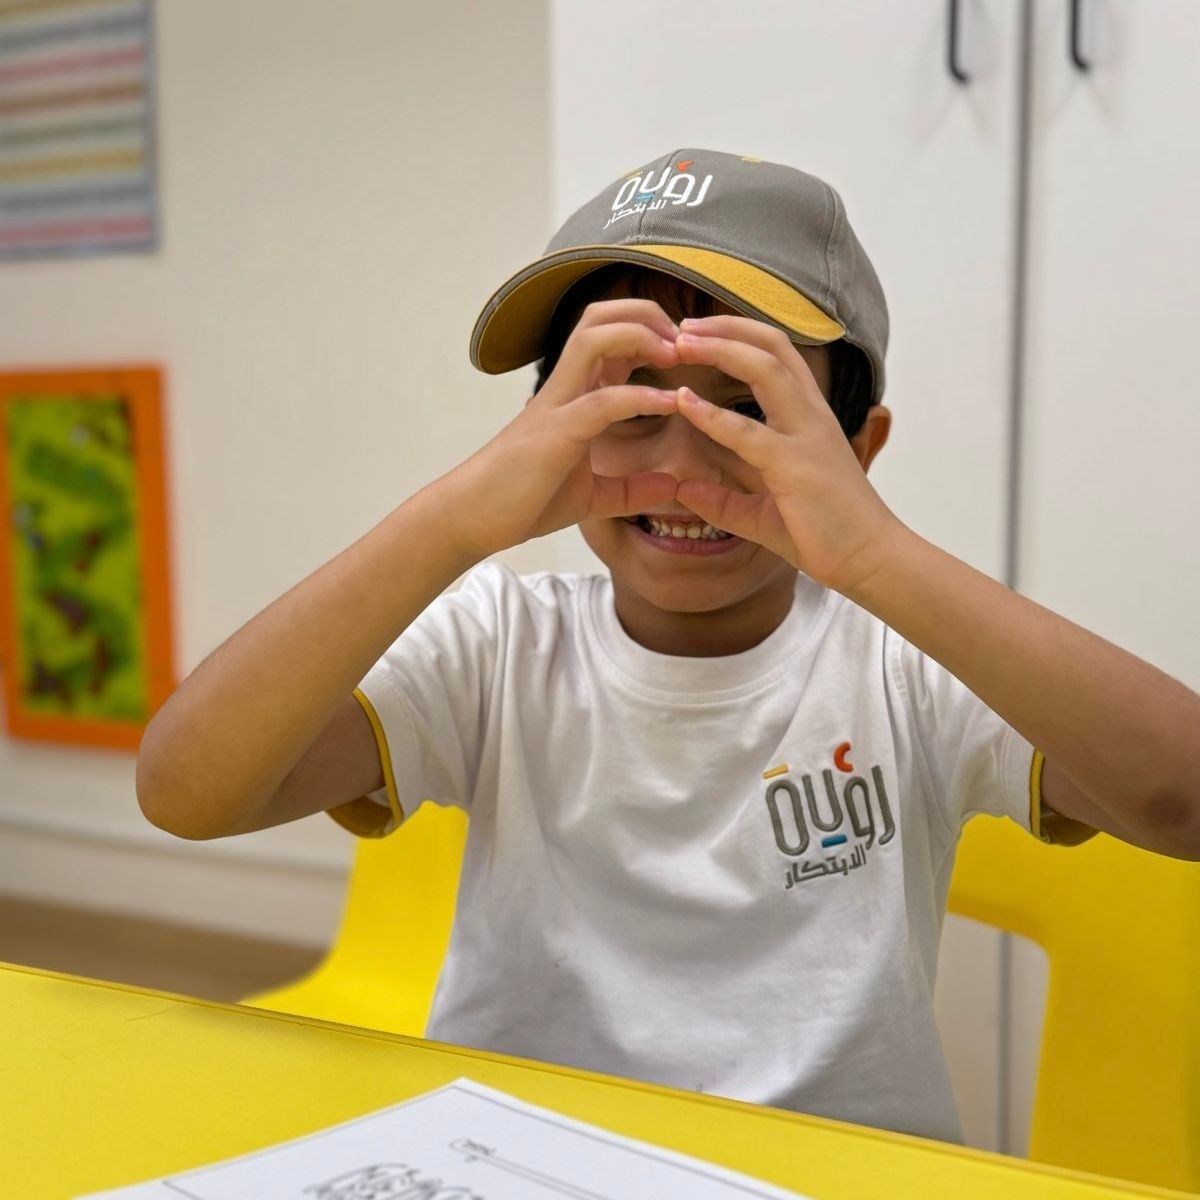 A young boy wearing a hat and a white t-shirt with the word oui on it